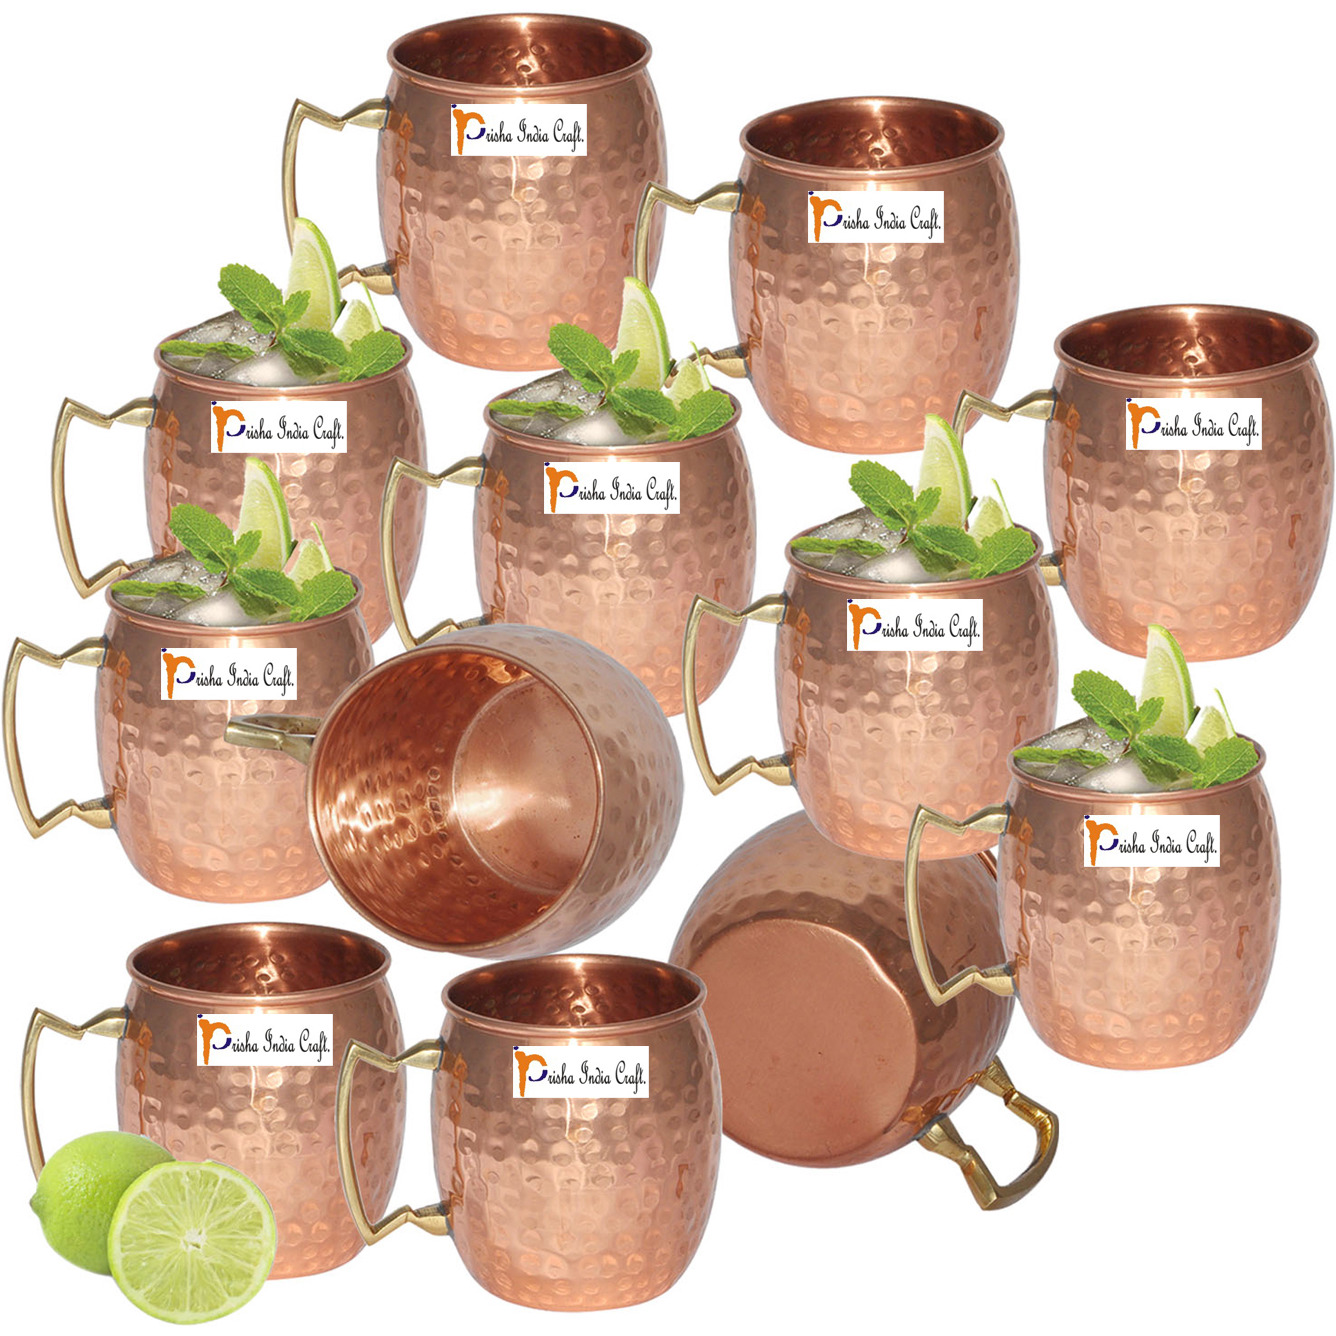 Set of 12 - Prisha India Craft B. Moscow Mule Solid Copper Mug 550 ML / 18 oz - 100% Pure Copper Hammered Best Quality Lacquered Finish, Cocktail Cup, Copper Mugs, Cocktail Mugs with No Inner Linings